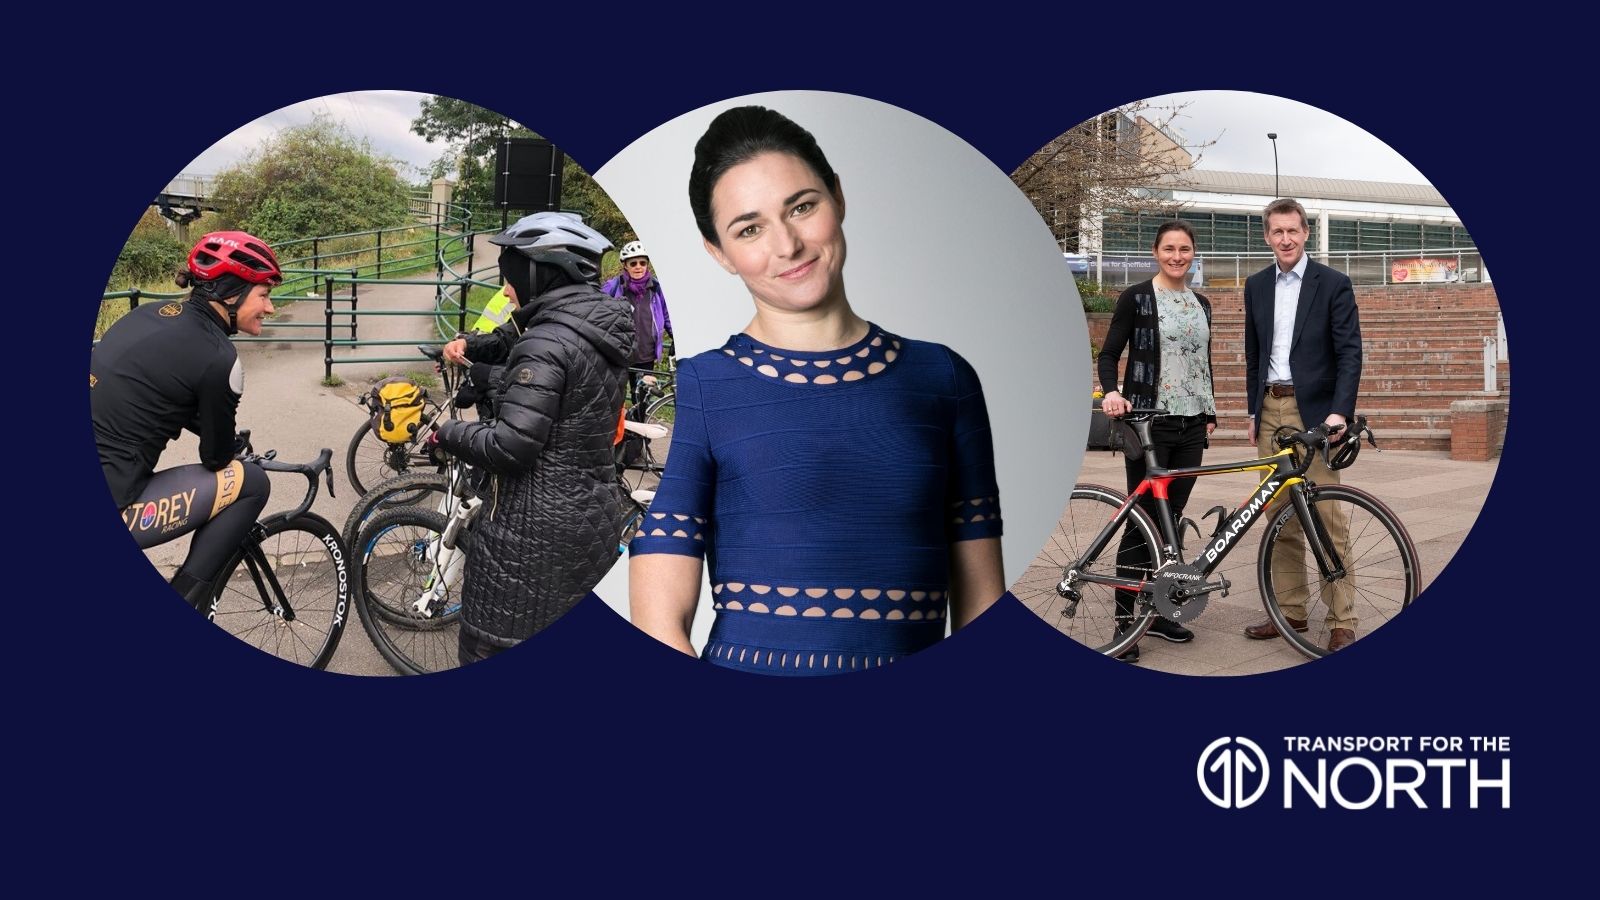 Dame Sarah Storey joins Transport for the North Conference to highlight the importance of active travel